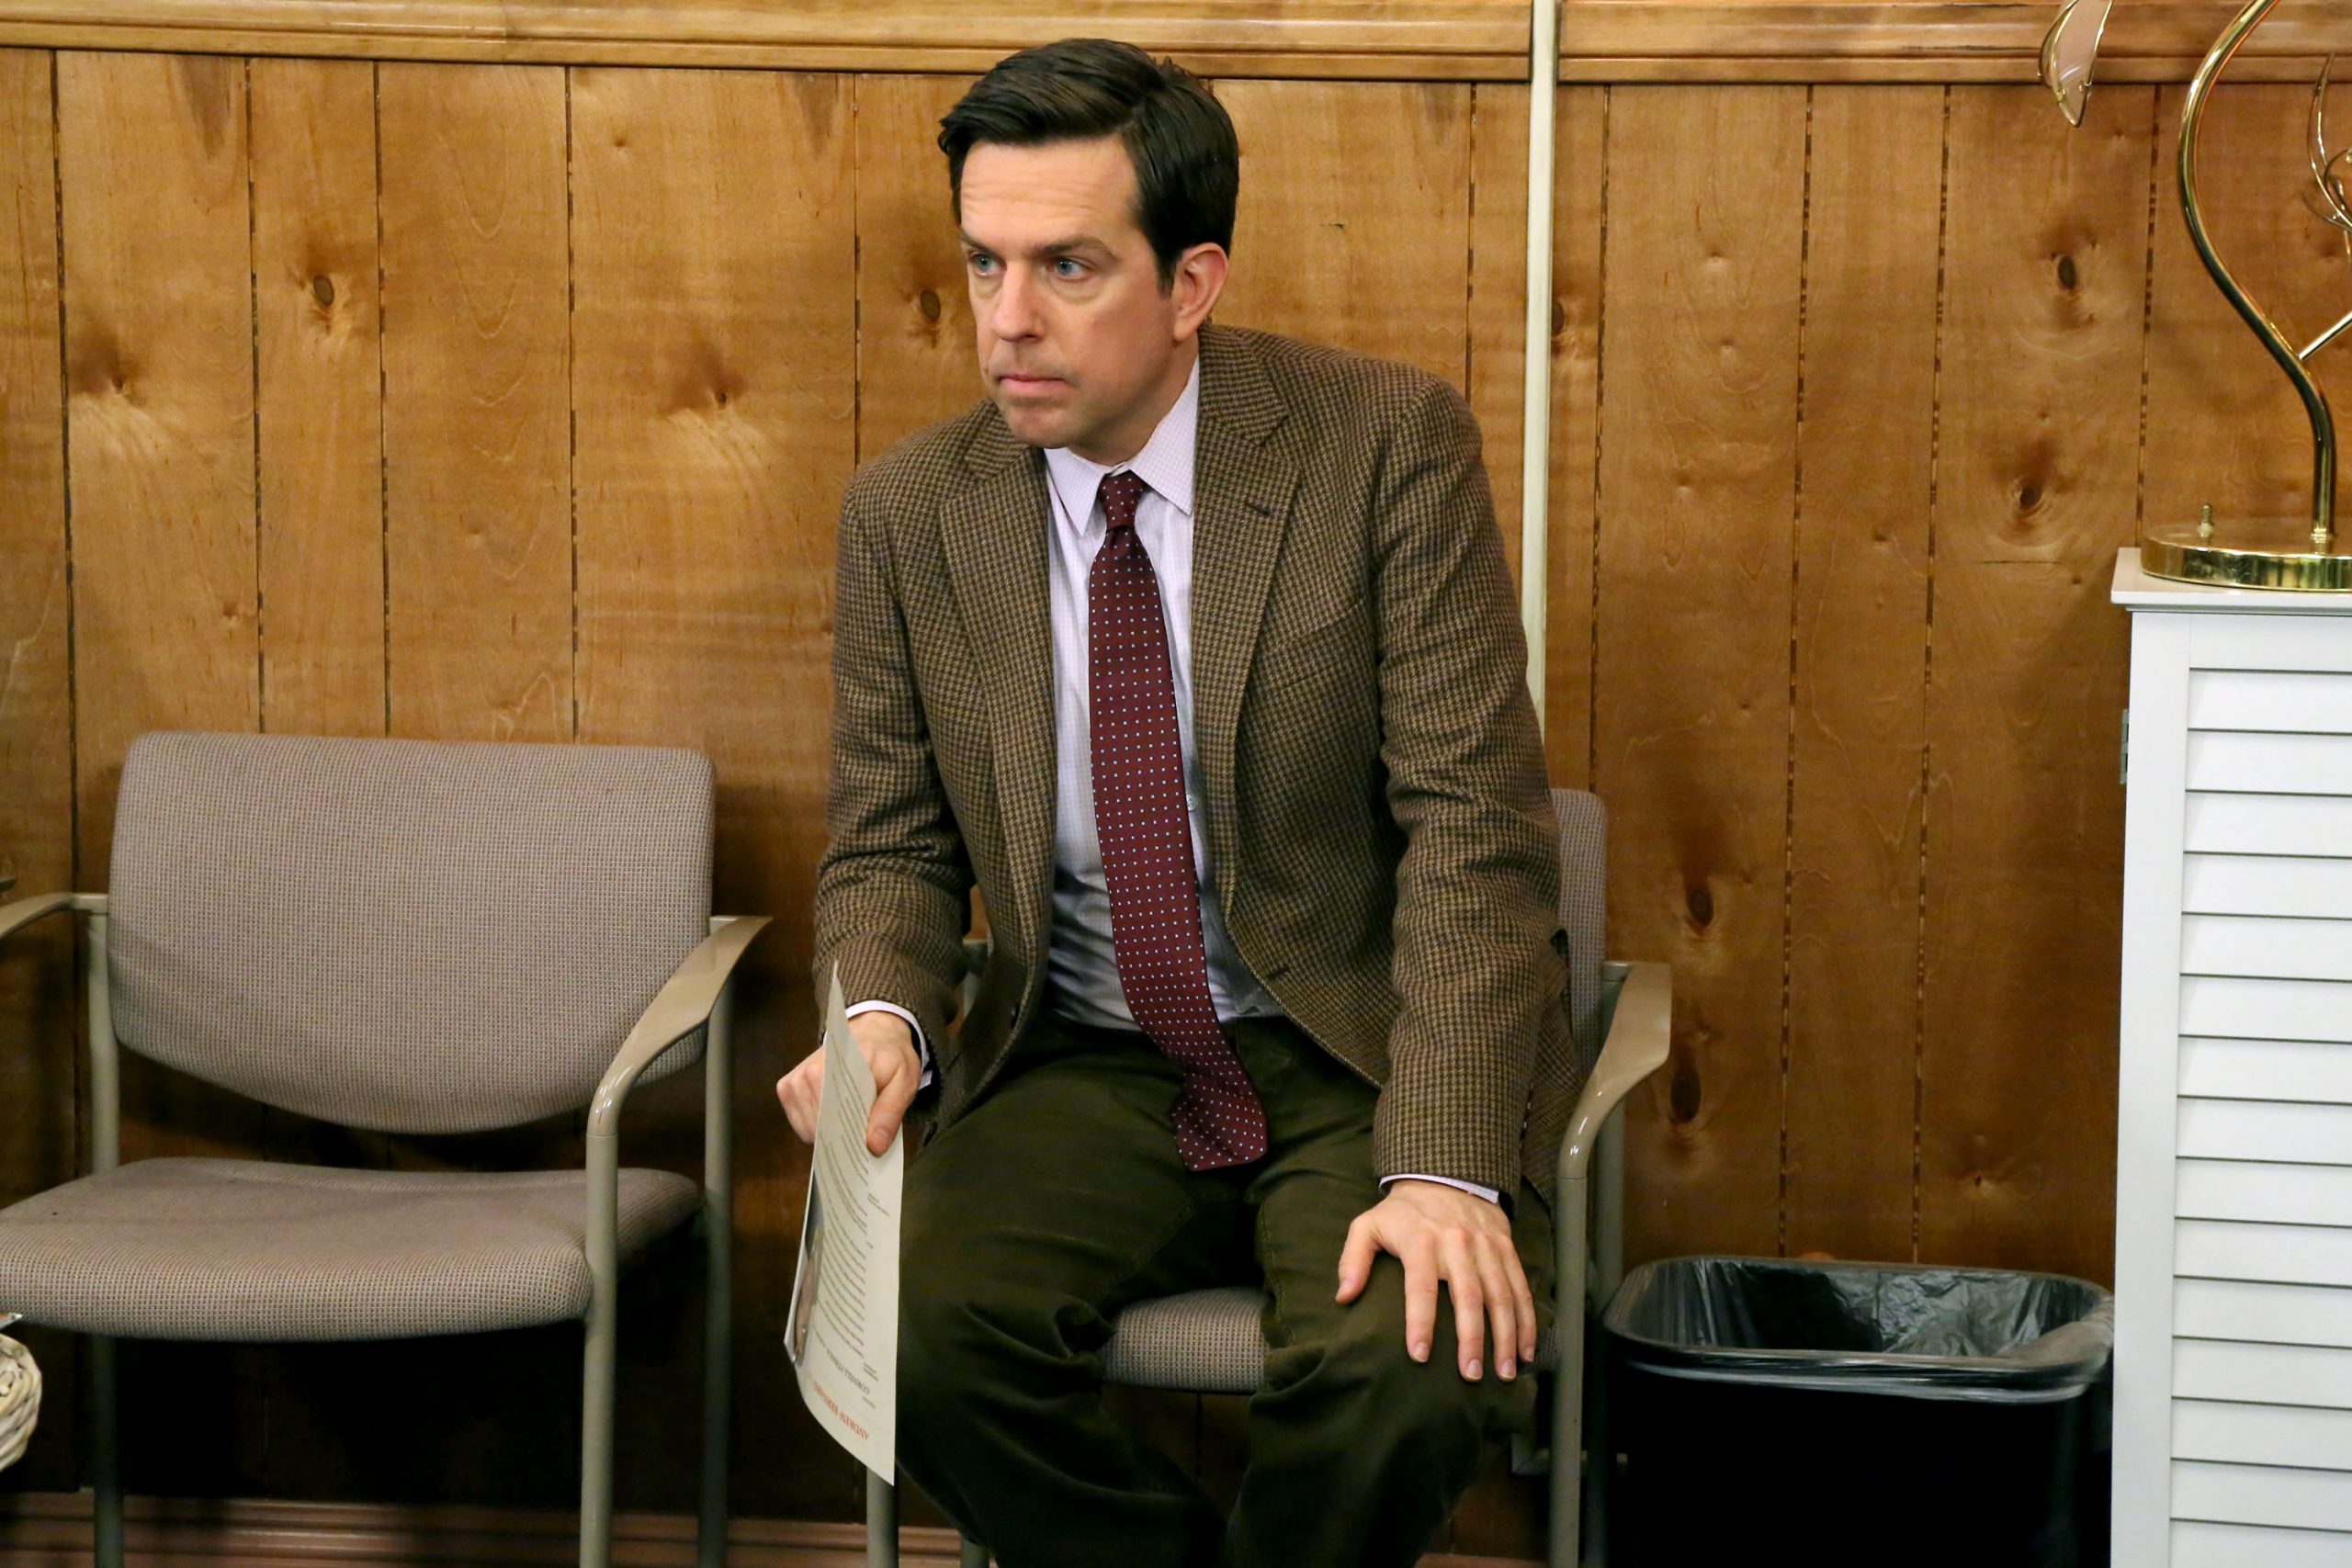 ‘The Office’: Ed Helms’ College Experience Helped Create Andy’s Ringtone in Season 3